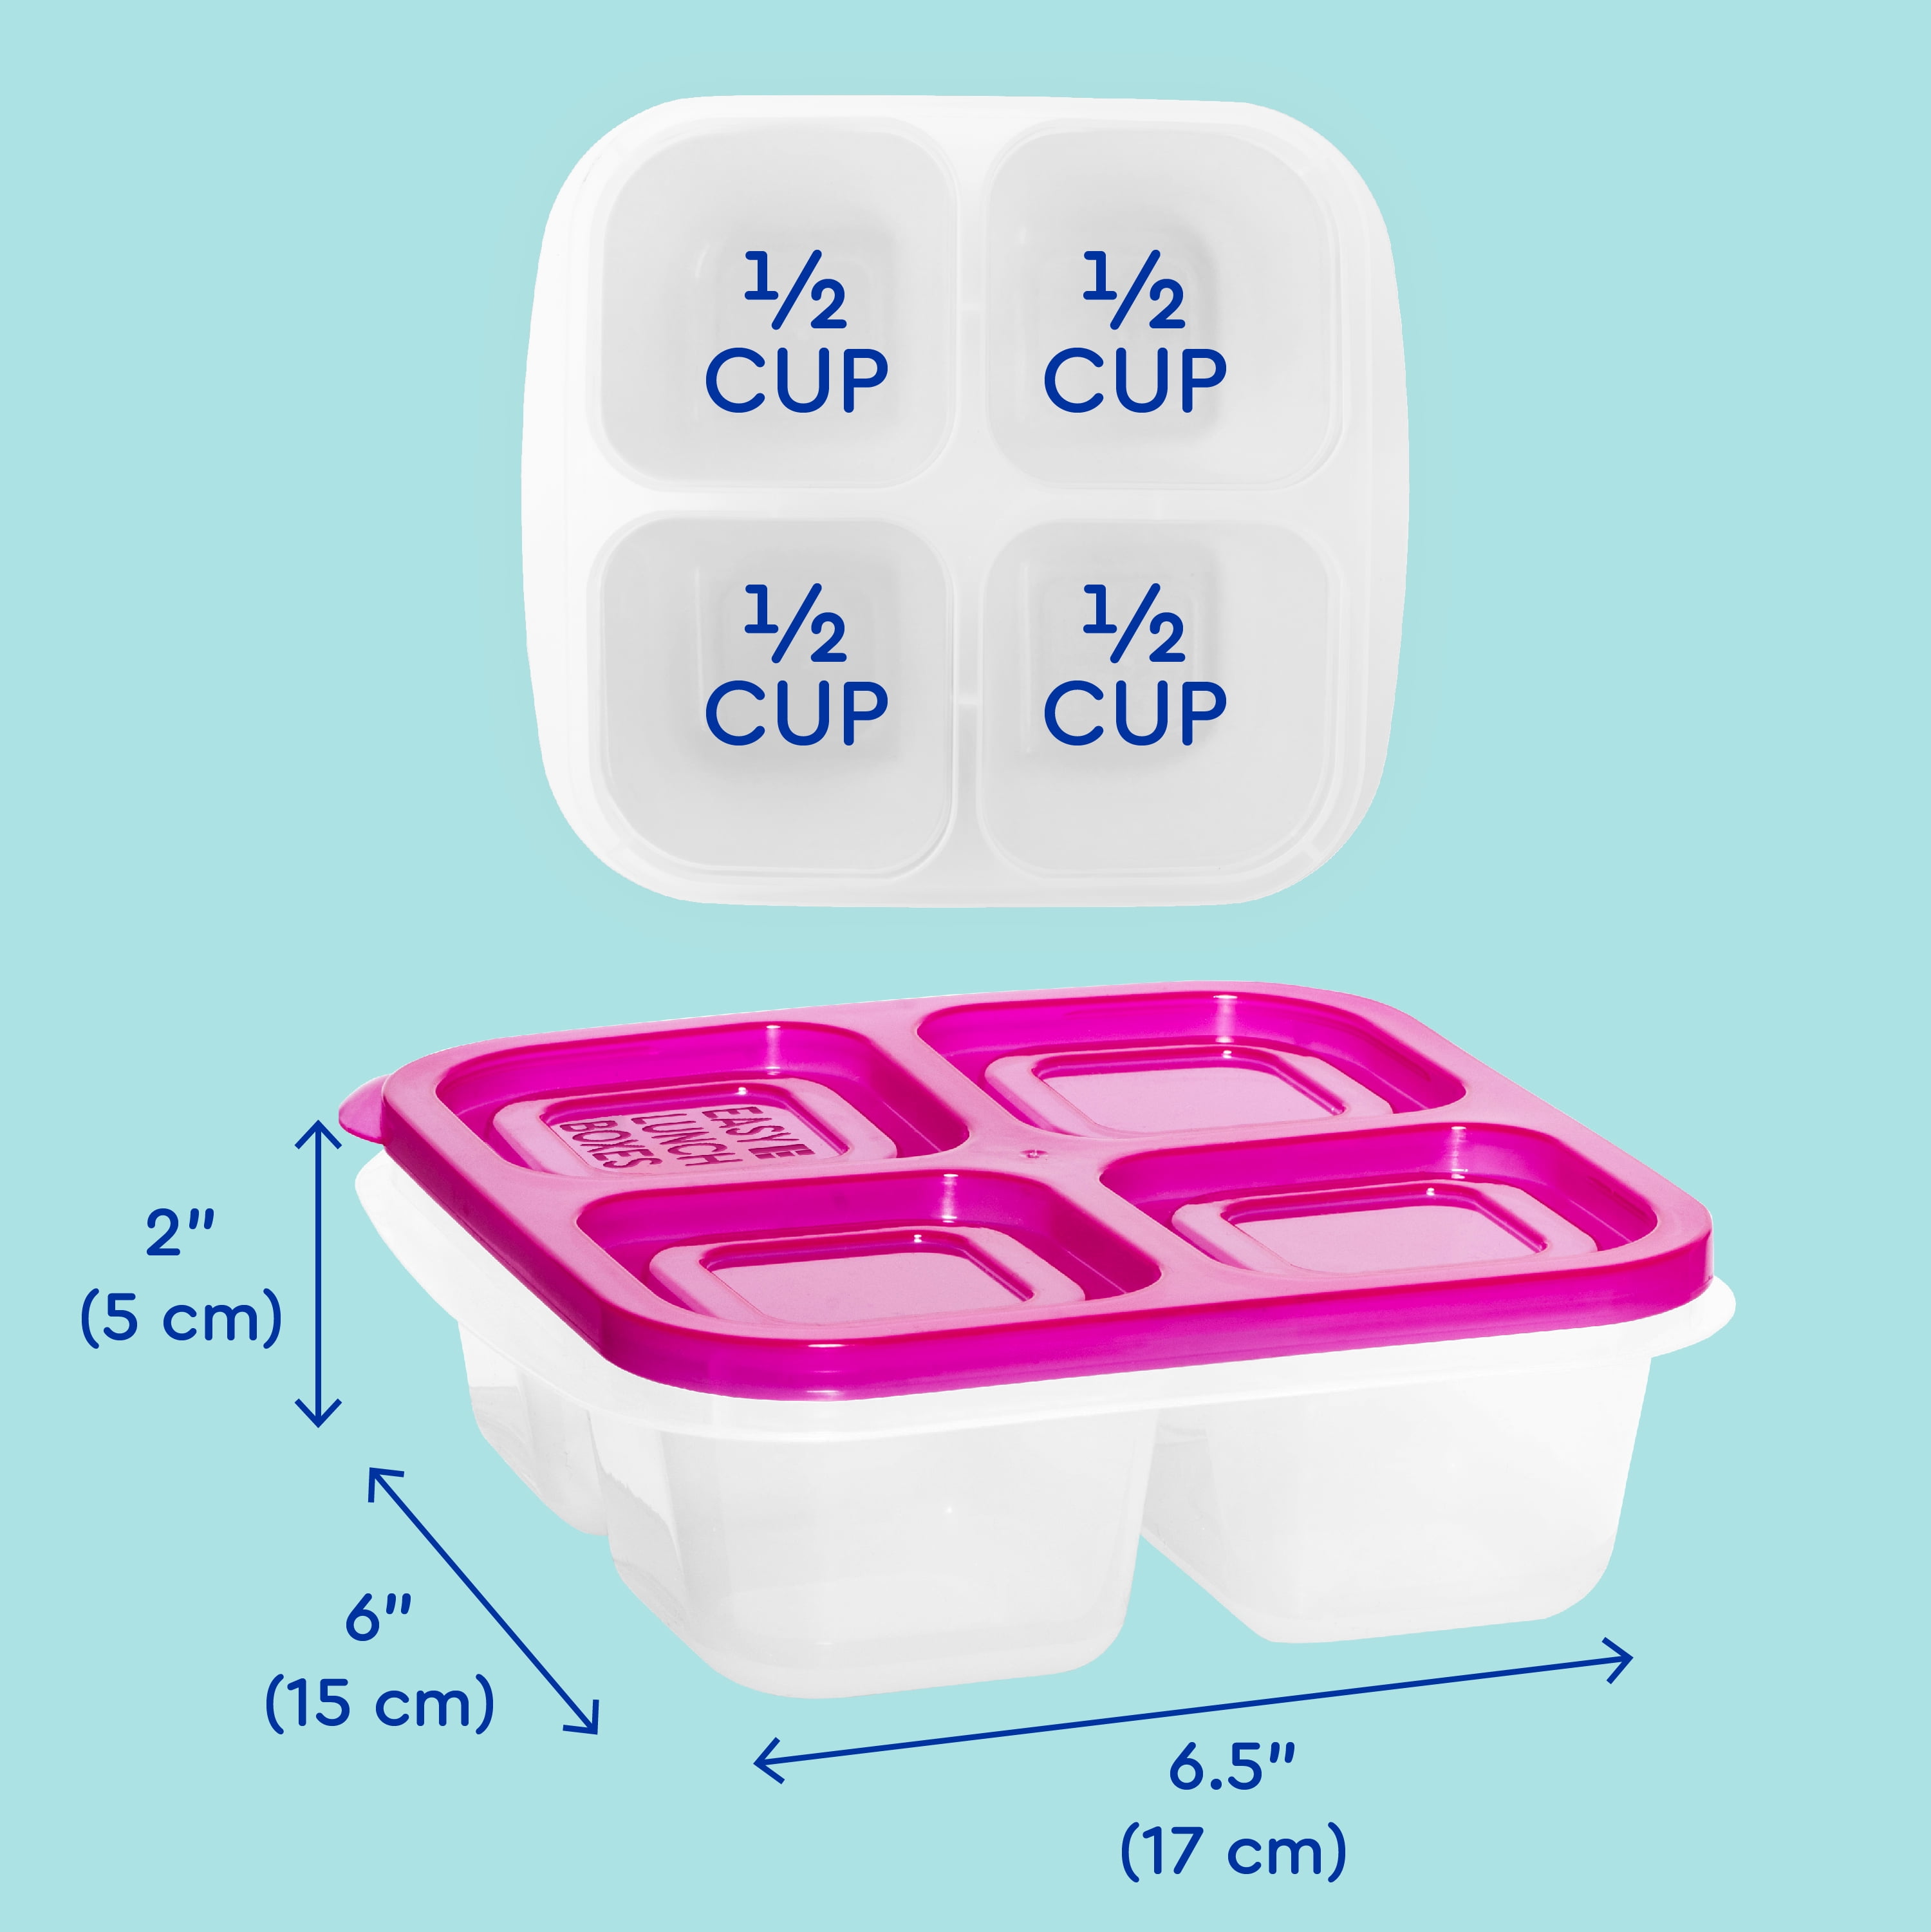 6 Pack Snack Containers, 4 Compartment Divided Snack Container for Kids,  Bento Snack Box for Adults,…See more 6 Pack Snack Containers, 4 Compartment